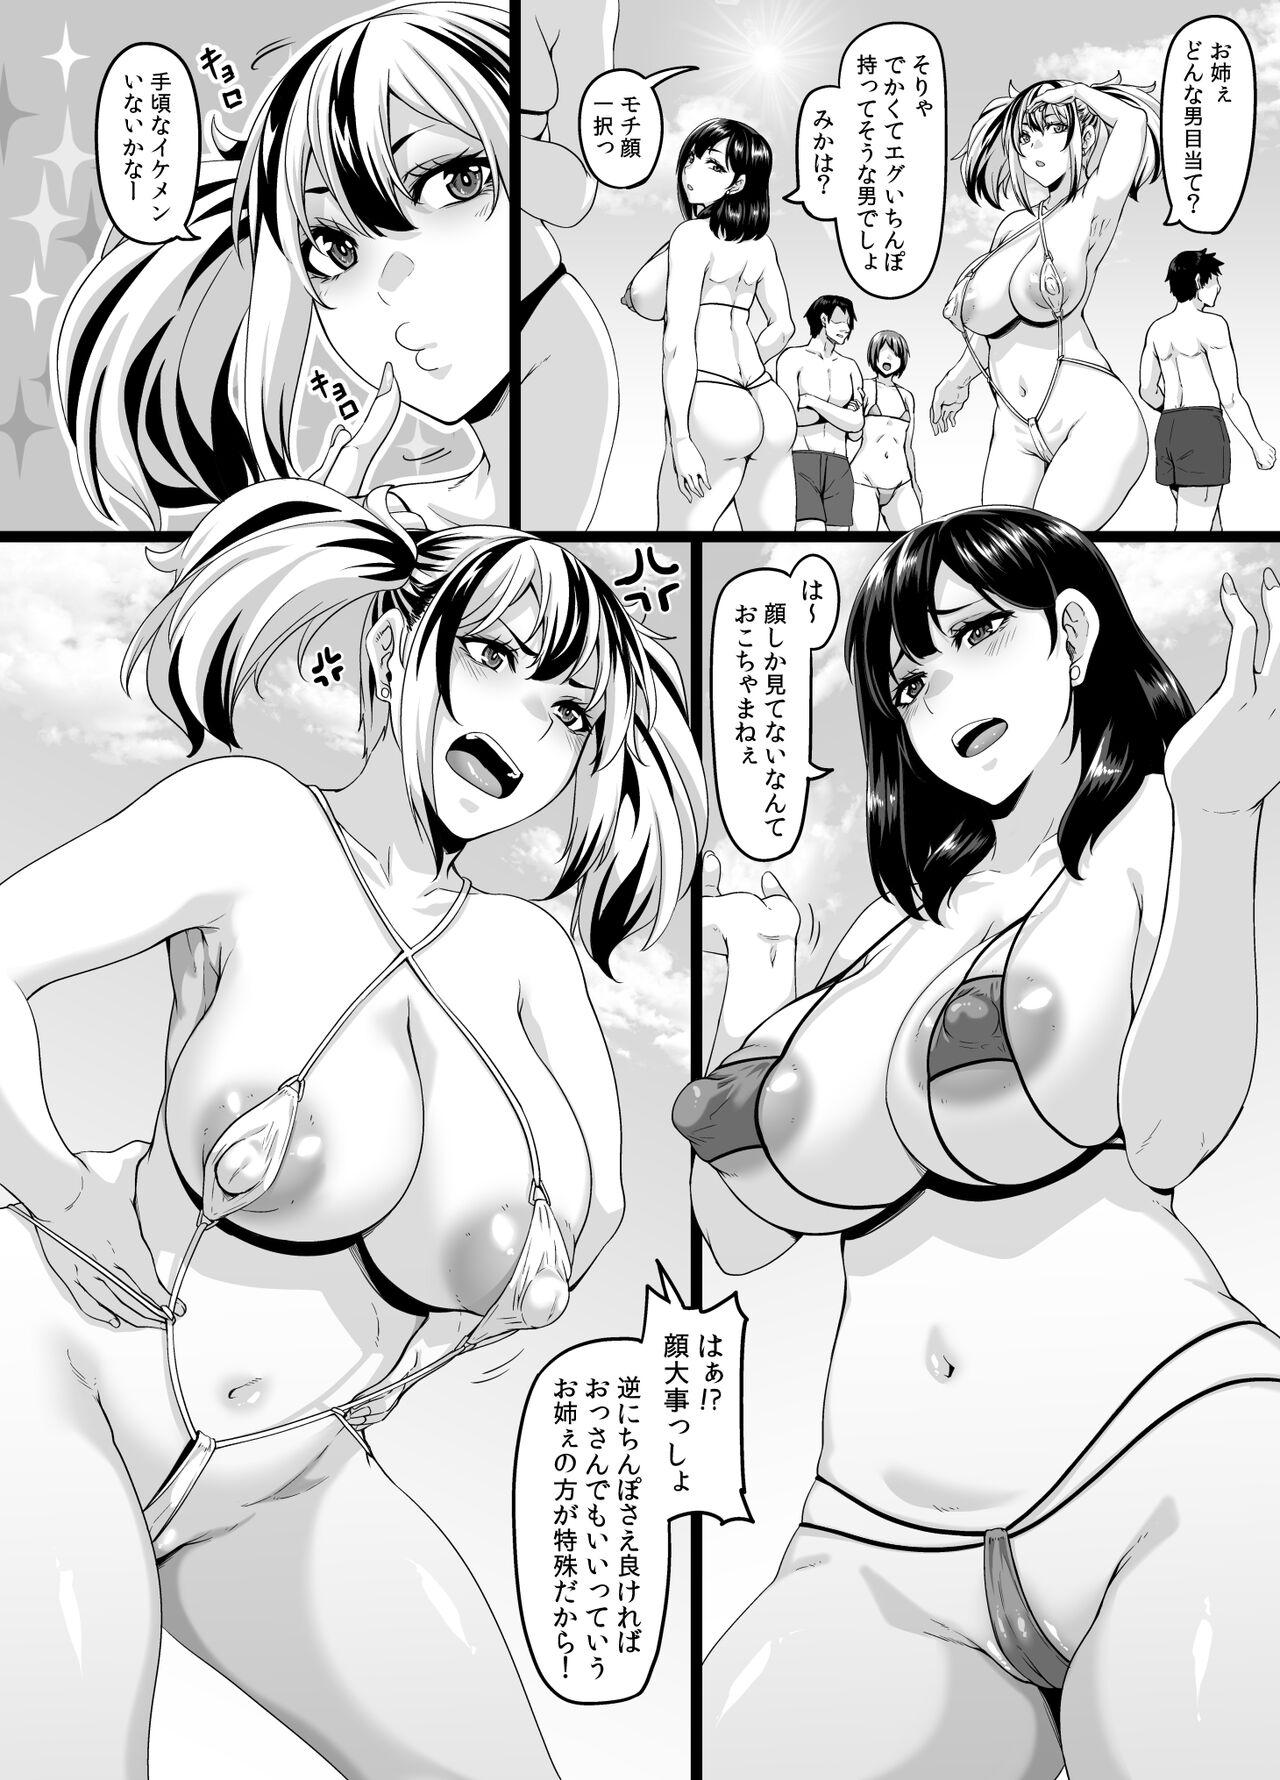 Squirters Family Trip to Yarimoku Beach 2 - Original Indoor - Page 4